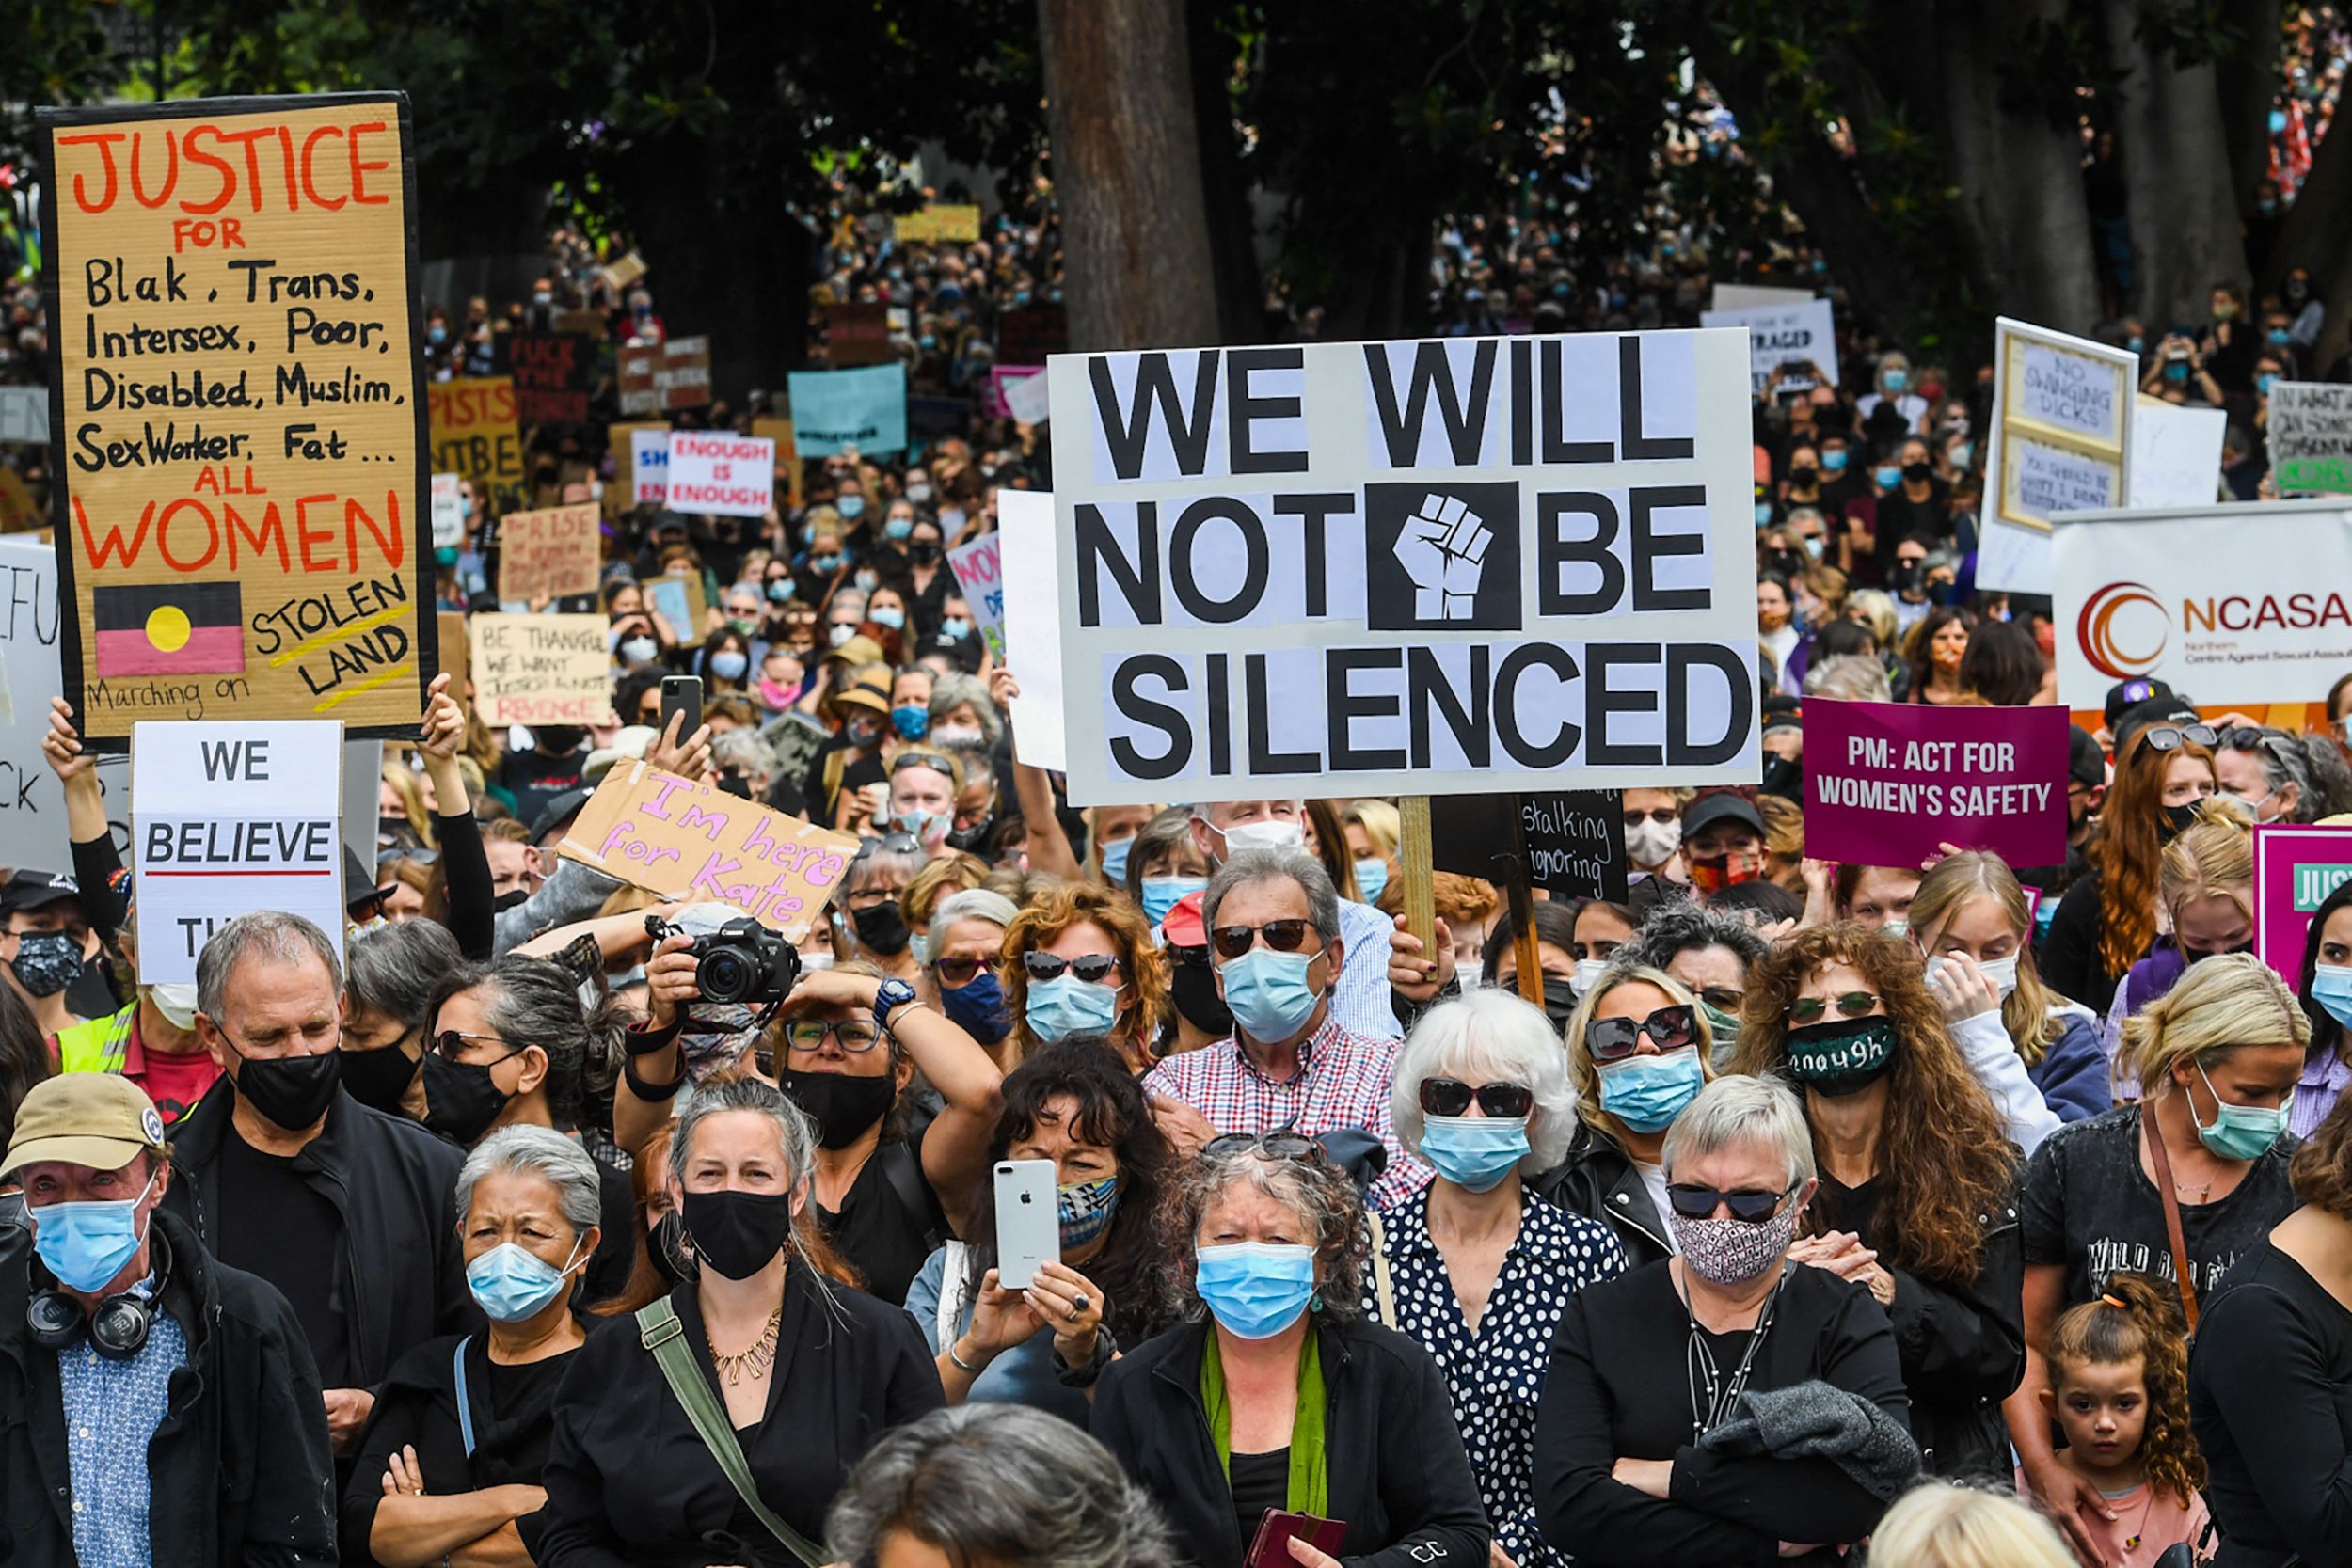  People attend a protest against sexual violence and gender inequality in Melbourne on March 15